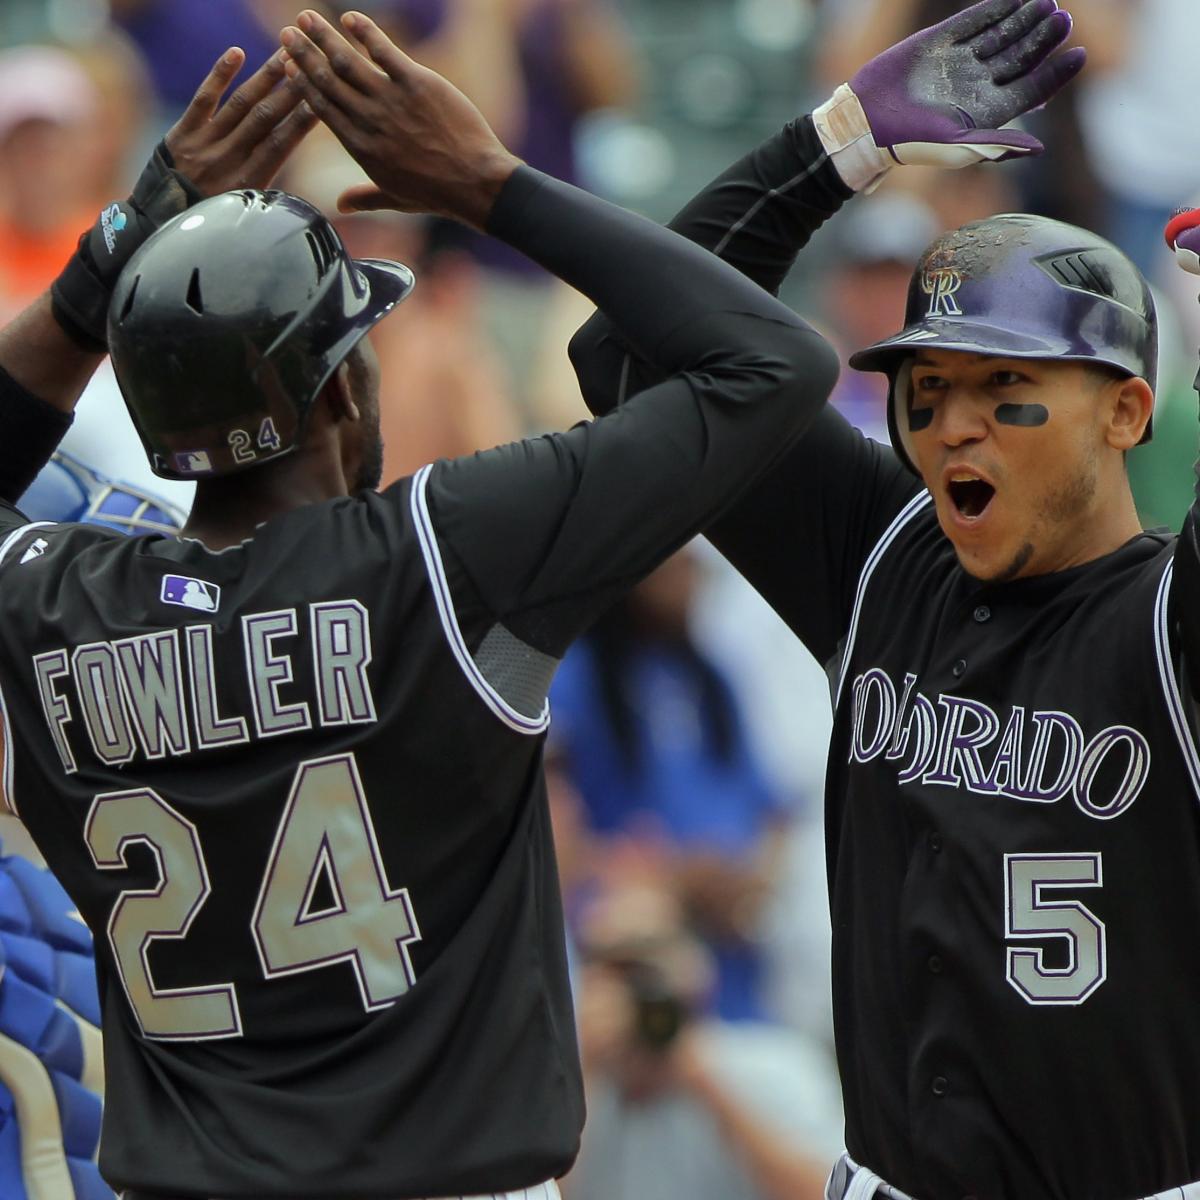 Giambi's walkoff homer gives Rockies 10th straight victory – The Denver Post